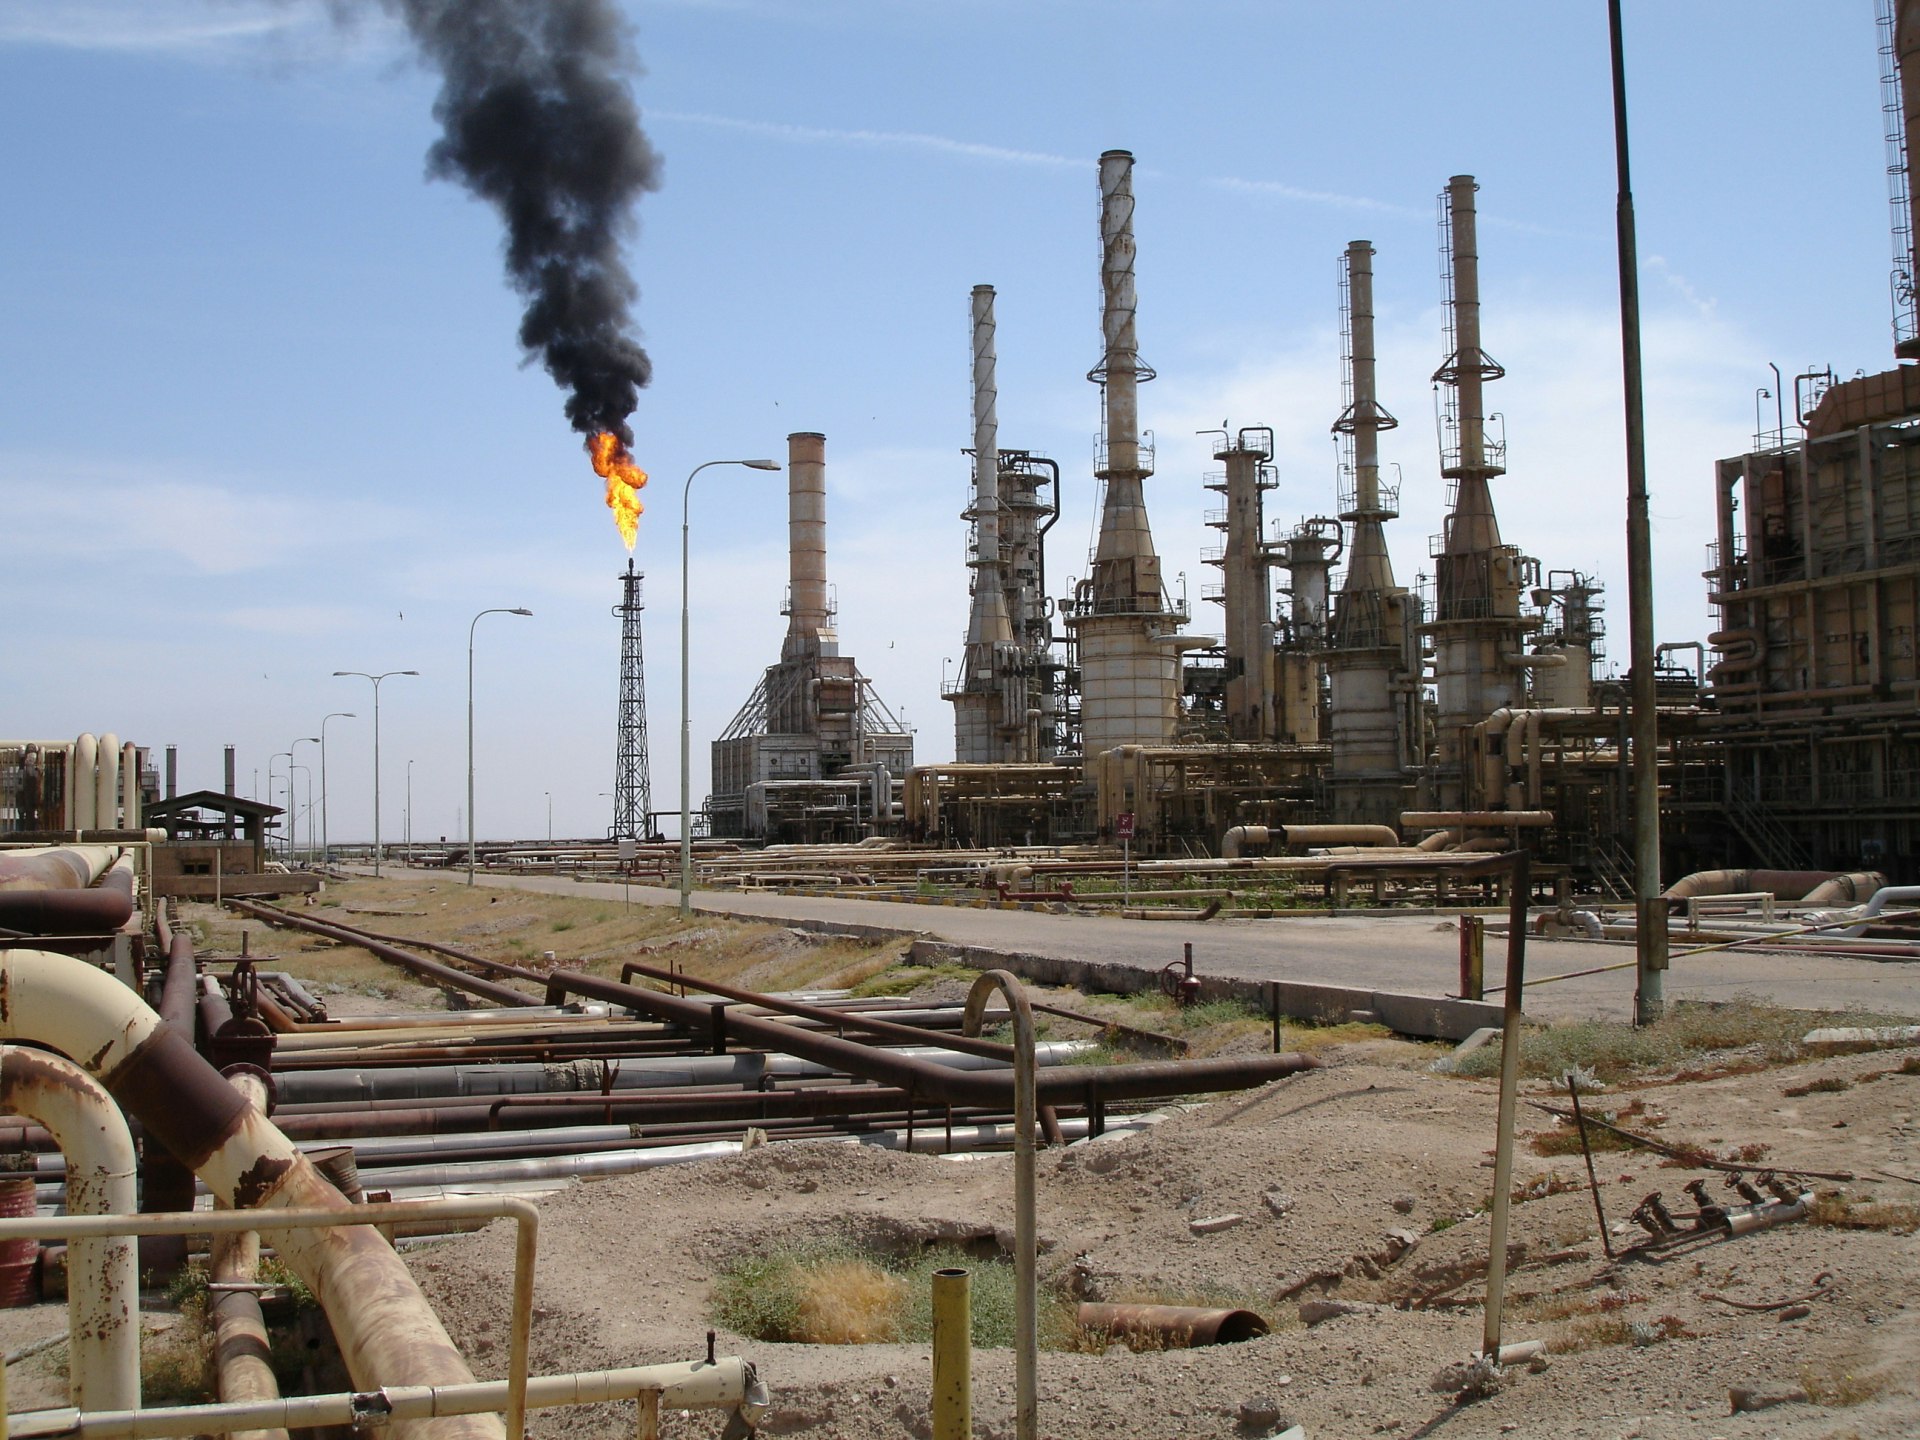 Building a Reliable Air Monitoring Solution in Challenging Environmental Conditions in Iraq